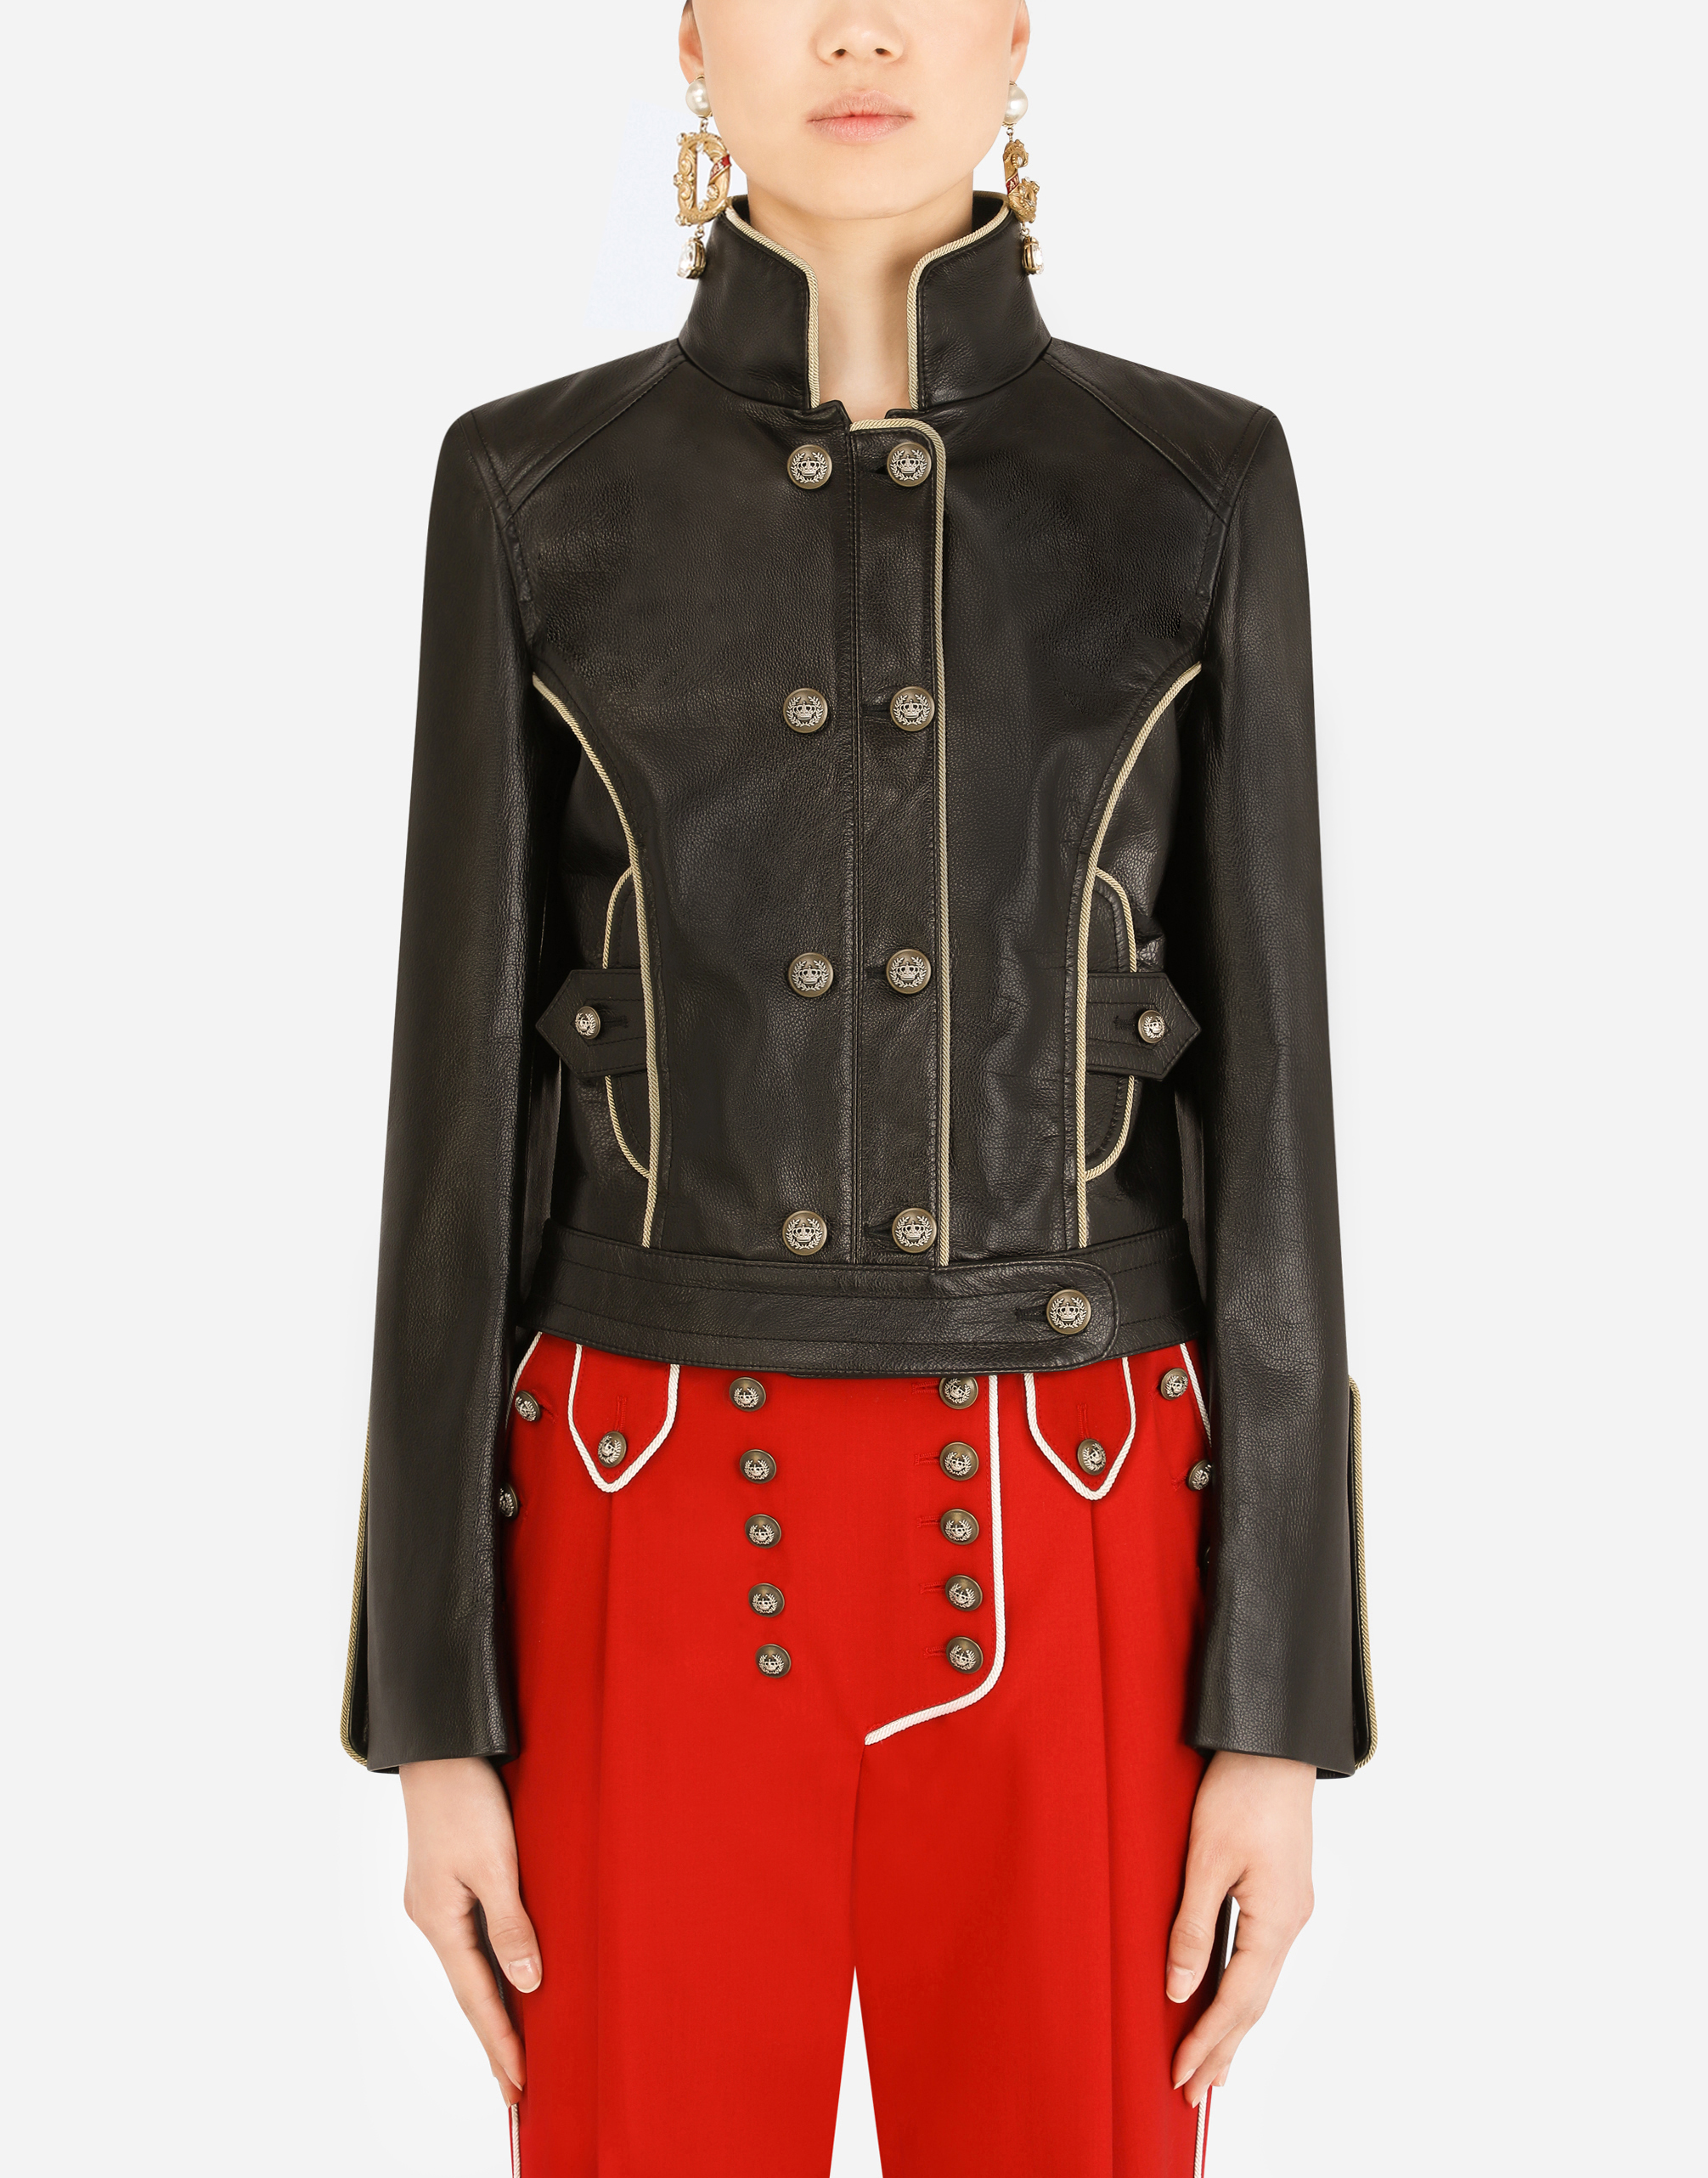 Dolce & Gabbana Leather Biker Jacket With Heraldic Buttons In Black